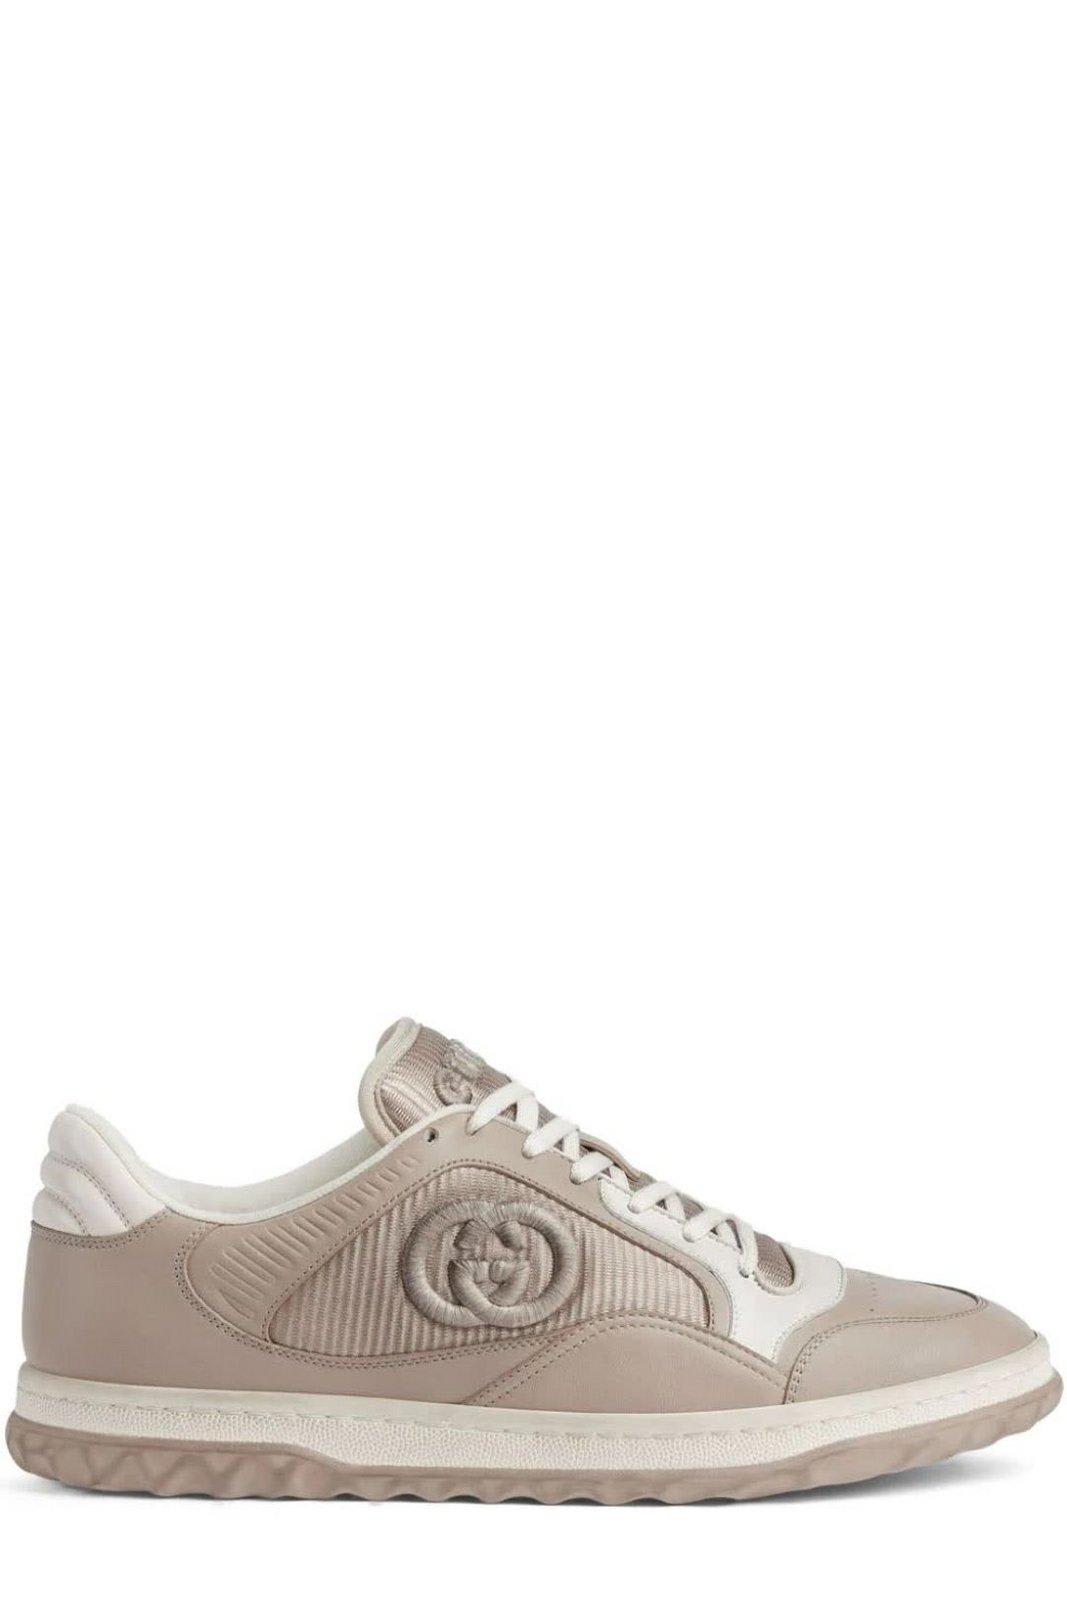 Gucci Logo Embroidered Low-top Sneakers